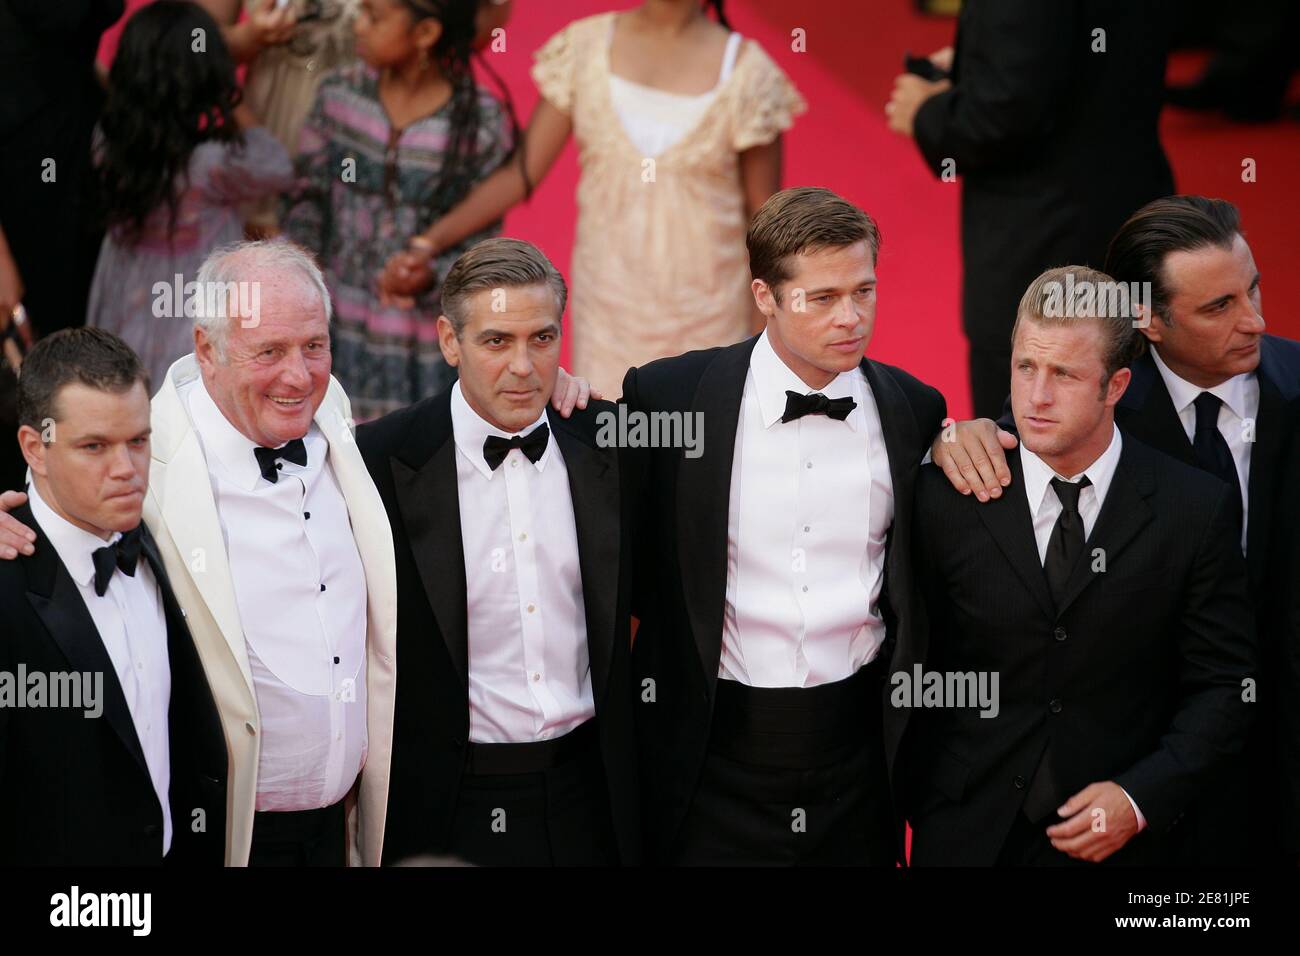 Cast members, Jerry Weintraub, Matt Damon, George Clooney, Brad Pitt, Scott Caan and Andy Garcia walk the red carpet of the Palais des Festivals in Cannes, France, May 24, 2007, to attend the gala screening of Steven Soderbergh's film Ocean's Thirteen presented out of competition at the 60th Cannes International Film Festival. After the gang's foray into Europe for 2004's 'Ocean's Twelve', the new flick returns the action to Las Vegas, where Reuben (Elliott Gould) thinks he's getting in on a casino deal with ruthless and sleazy Willy Bank (newcomer Al Pacino). But Bank double-crosses Reuben, g Stock Photo